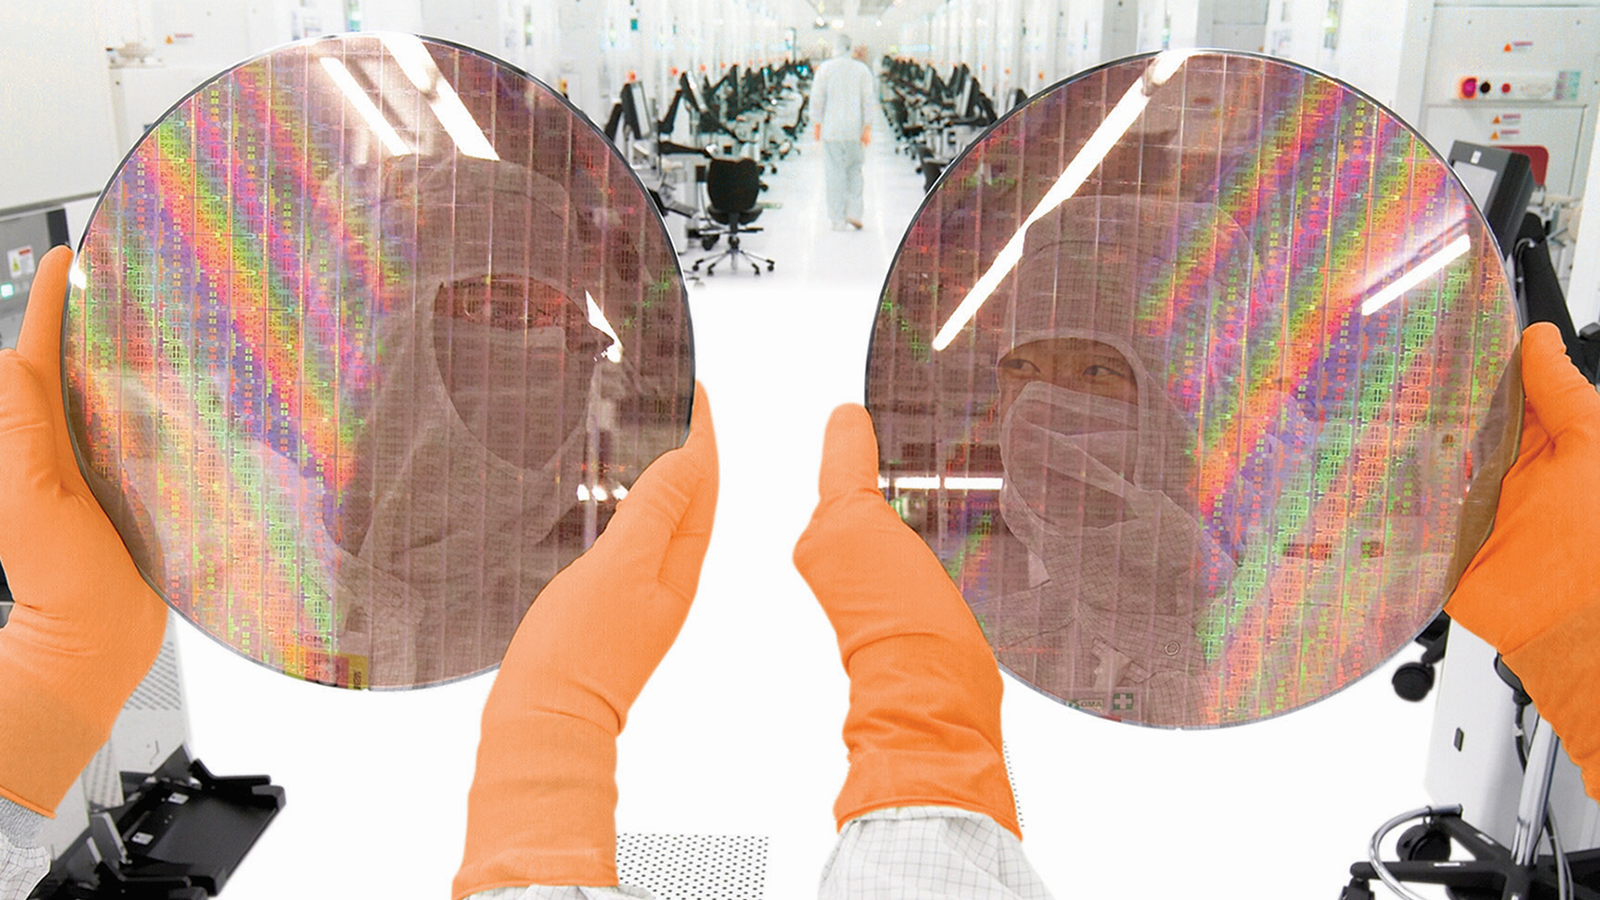 tsmc-and-samsung-foundry-becoming-dominant-makers-of-advanced-chips